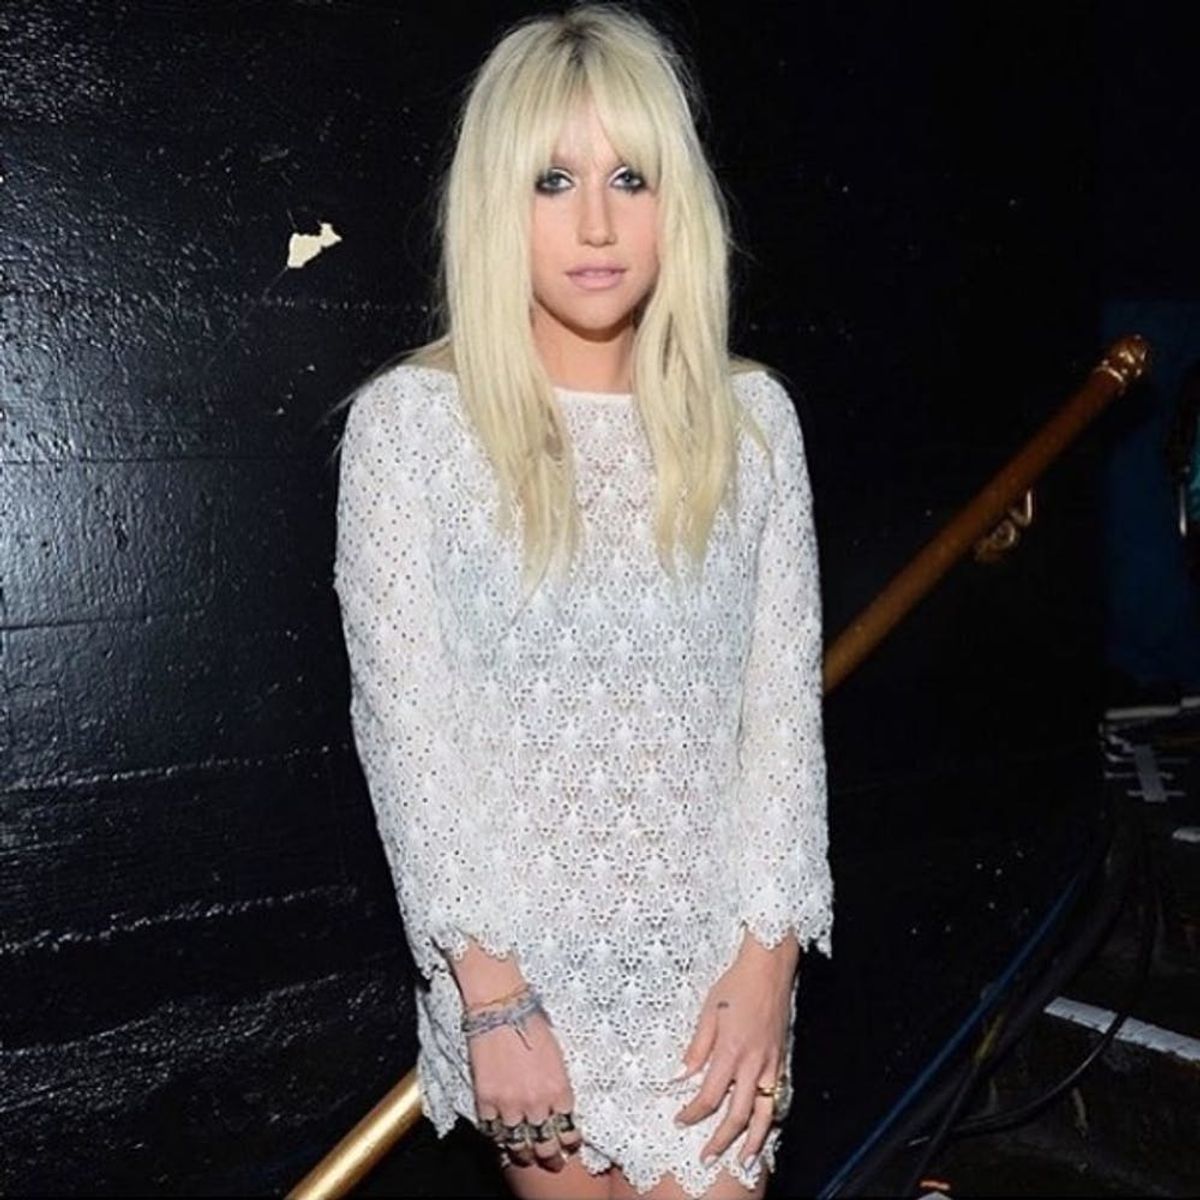 People Are Peeved at Dr. Luke’s Statement About Kesha’s New York Times Profile